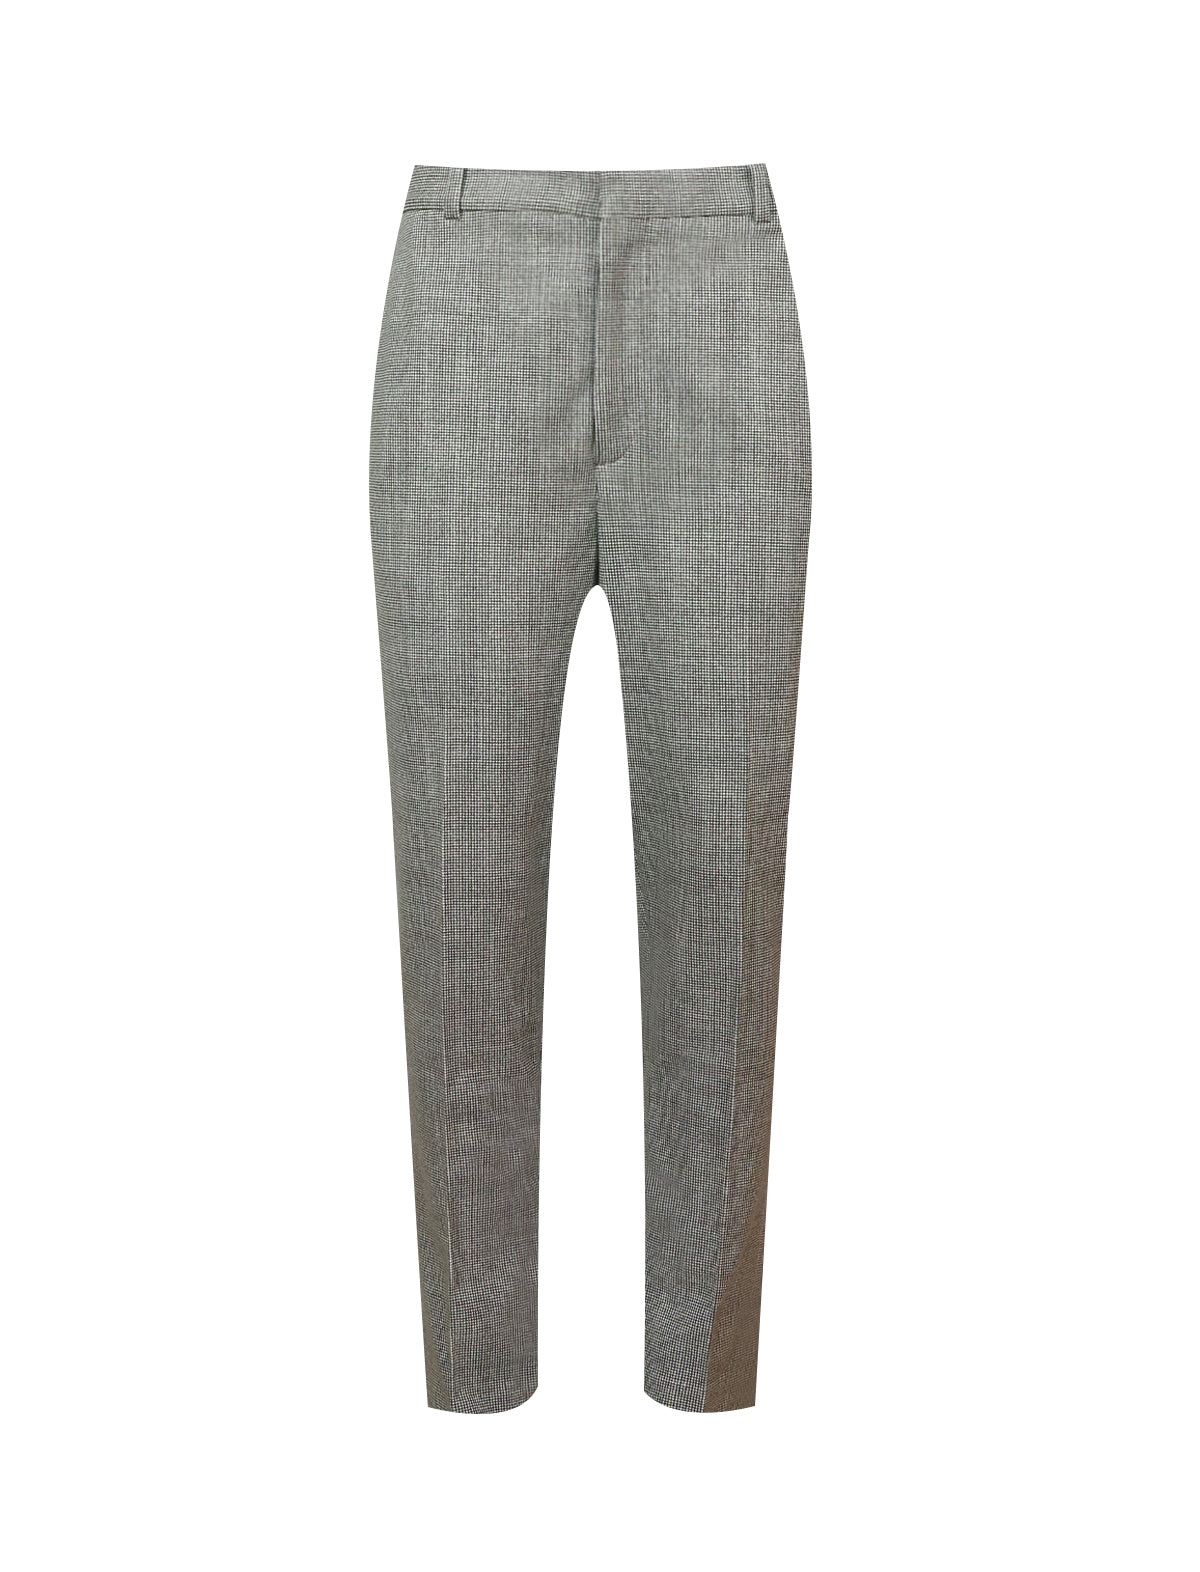 CIRCOLO 1901 Tailored Textured Pants in B&W Micros